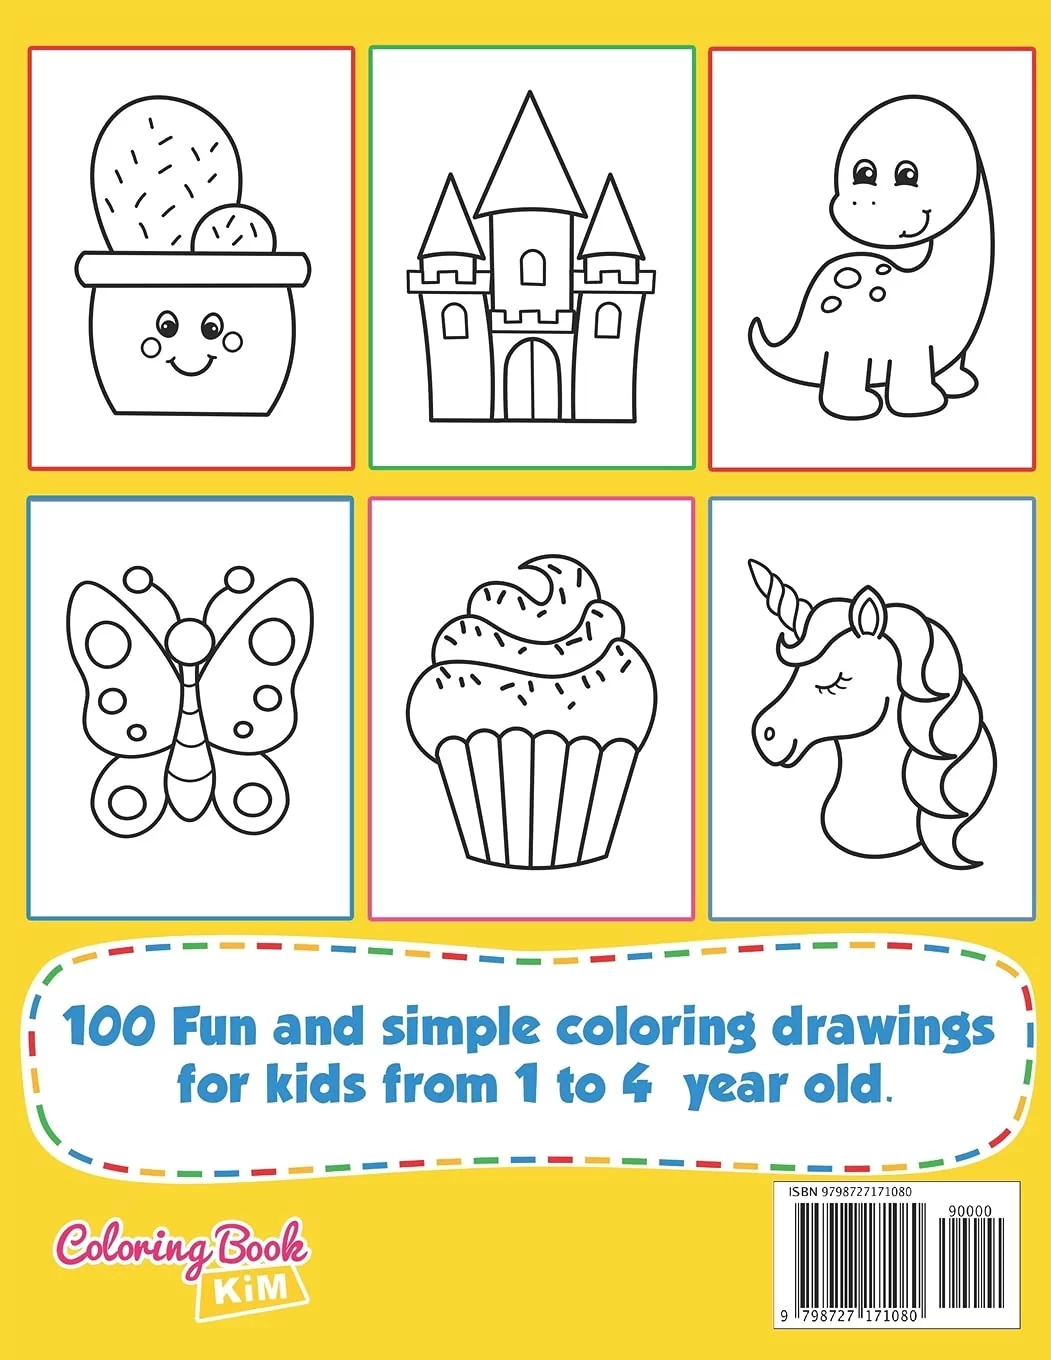 Coloring Book for Toddlers - 100 Easy And Fun Coloring Pages For Kids,  Preschool and Kindergarten - First Doodling For Children Ages 1-4: Edition,  Happiness, Scognamillo, Luca: 9798386491109: : Books